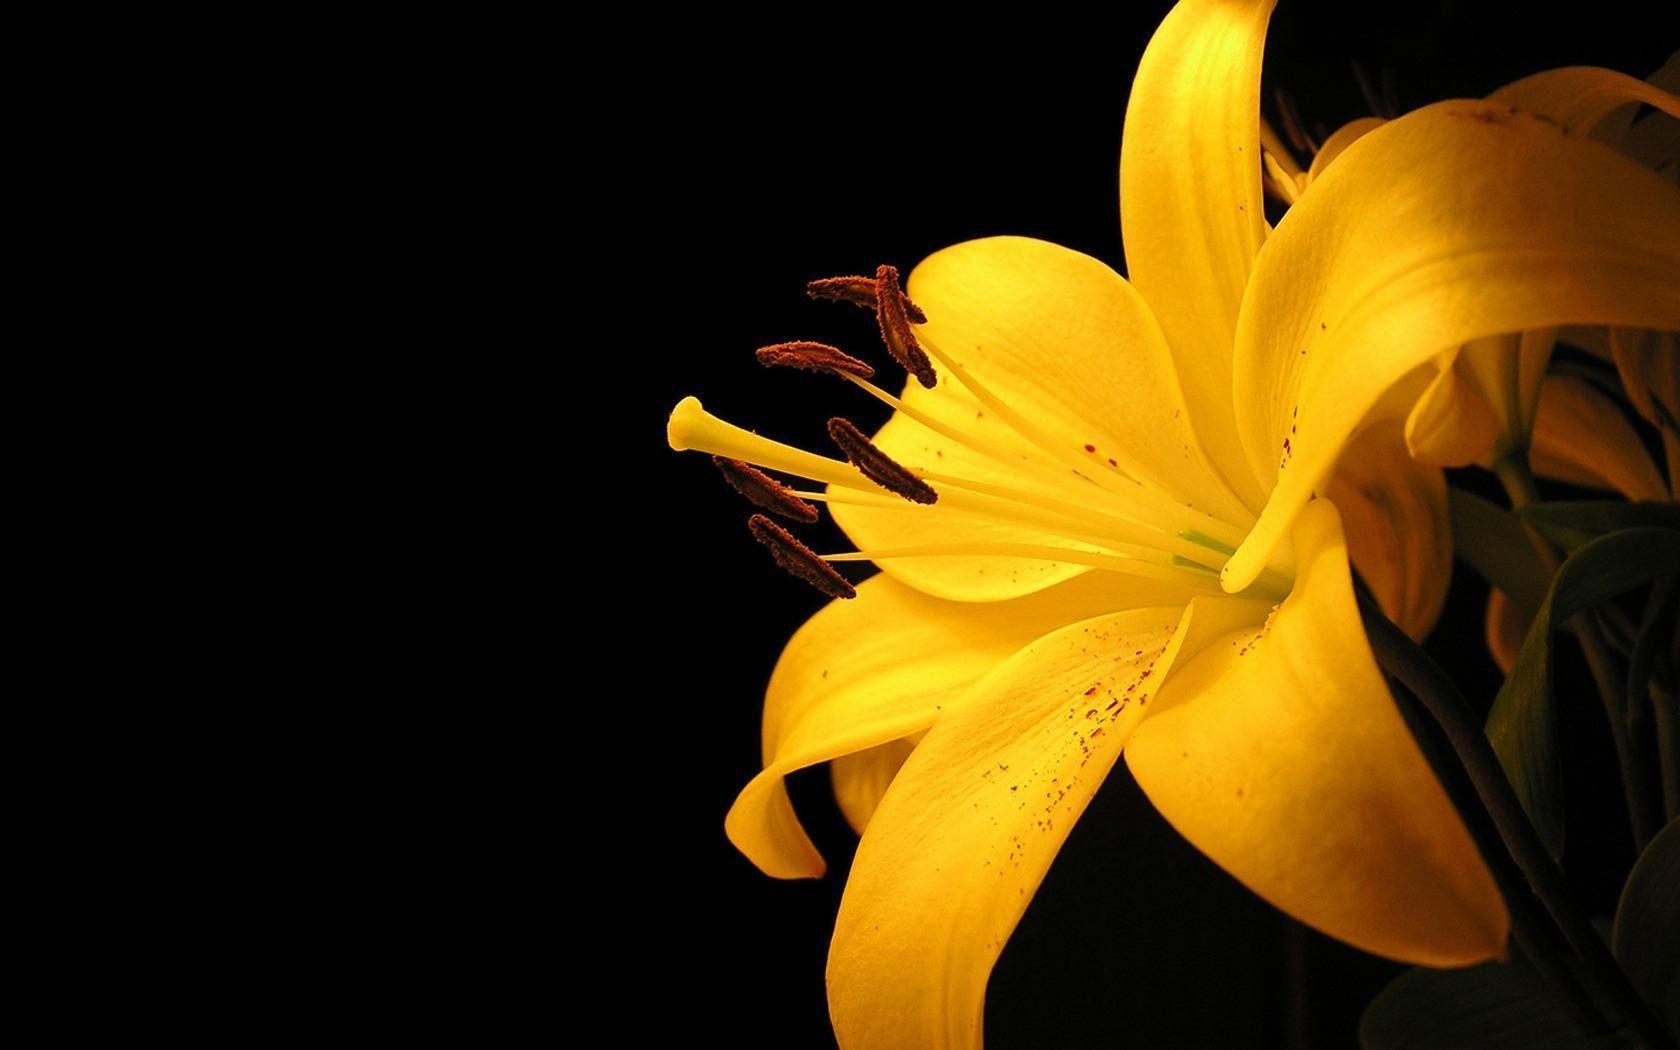 Yellow lilly on black background / 1680 x 1050 / Macro